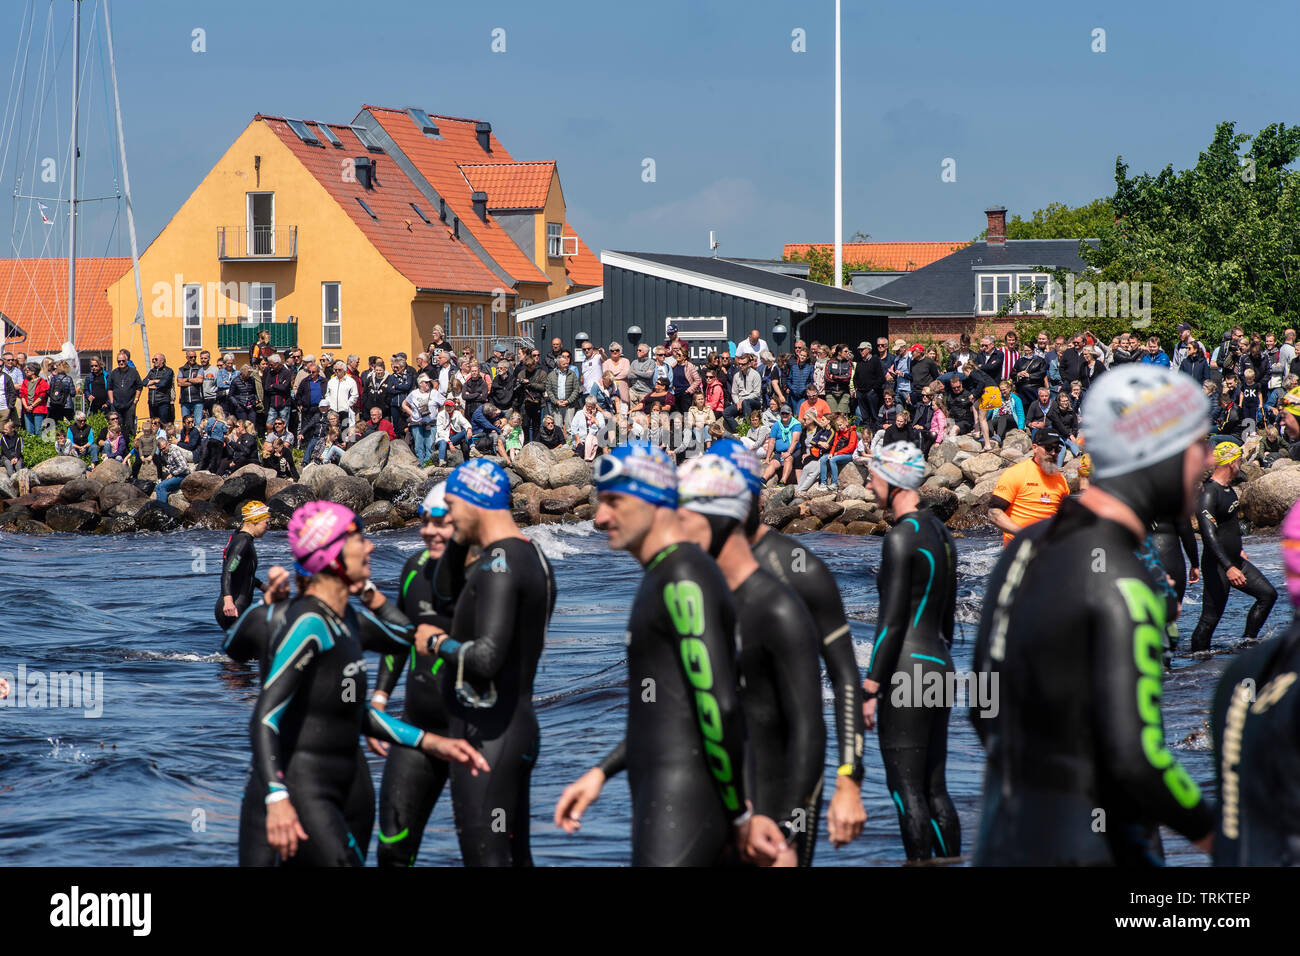 Large groups of triathlon contenders waiting to run into the sea during the Karrebæksminde Triathlon in Denmark. The participants are wearing wetsuits Stock Photo